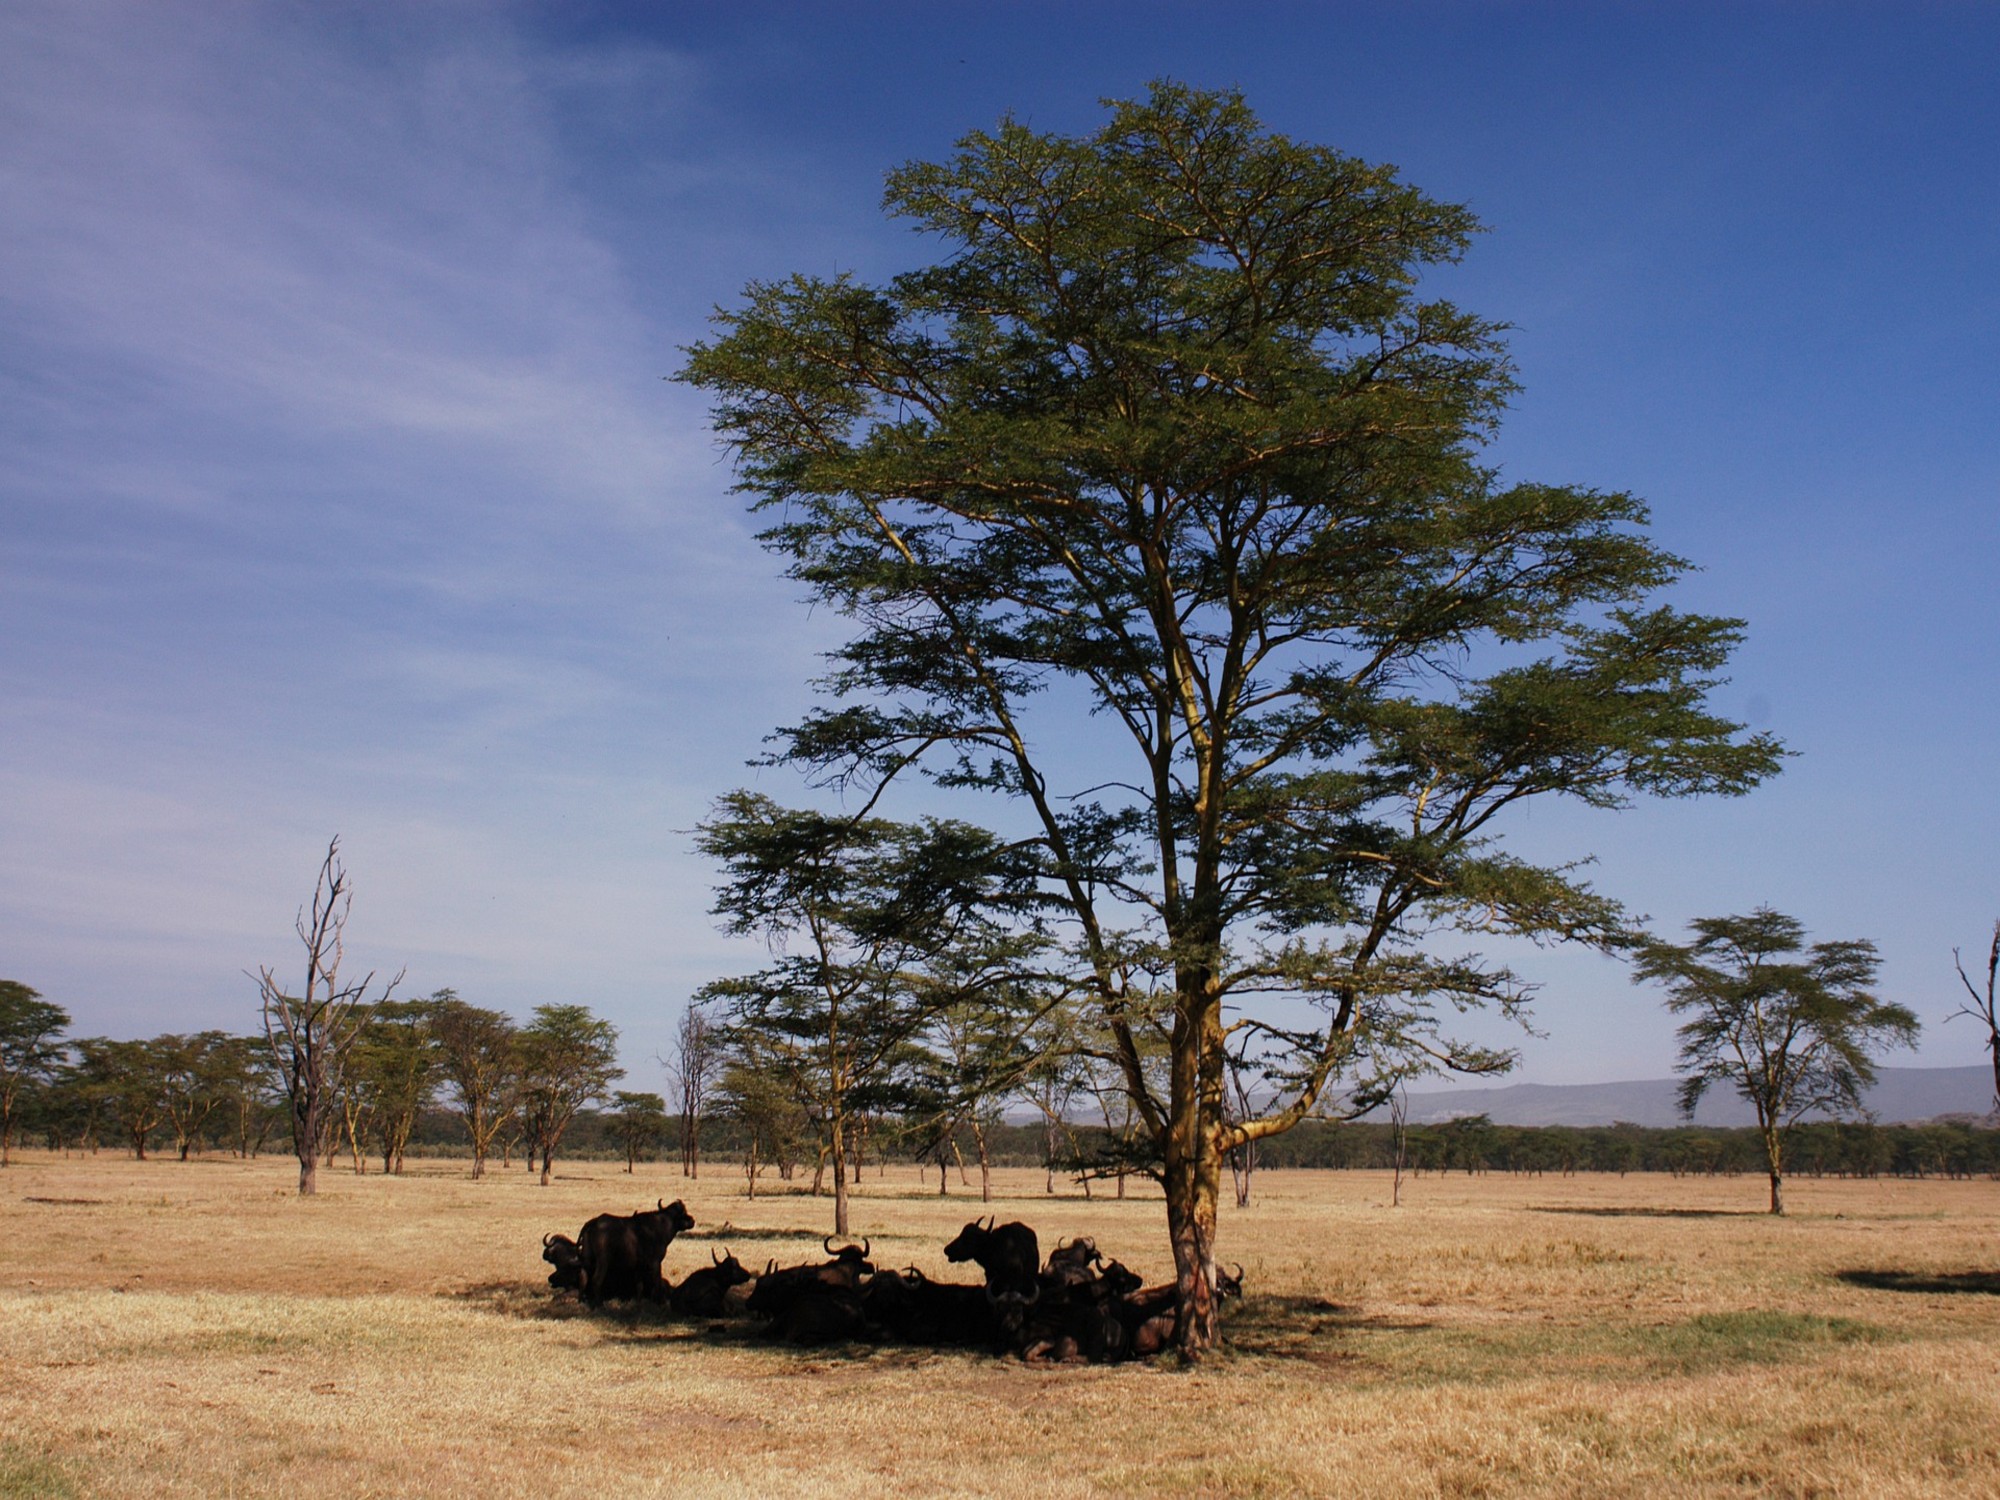 A group of Buffalo rests under a tree in the middle of a savannah, in Africa.